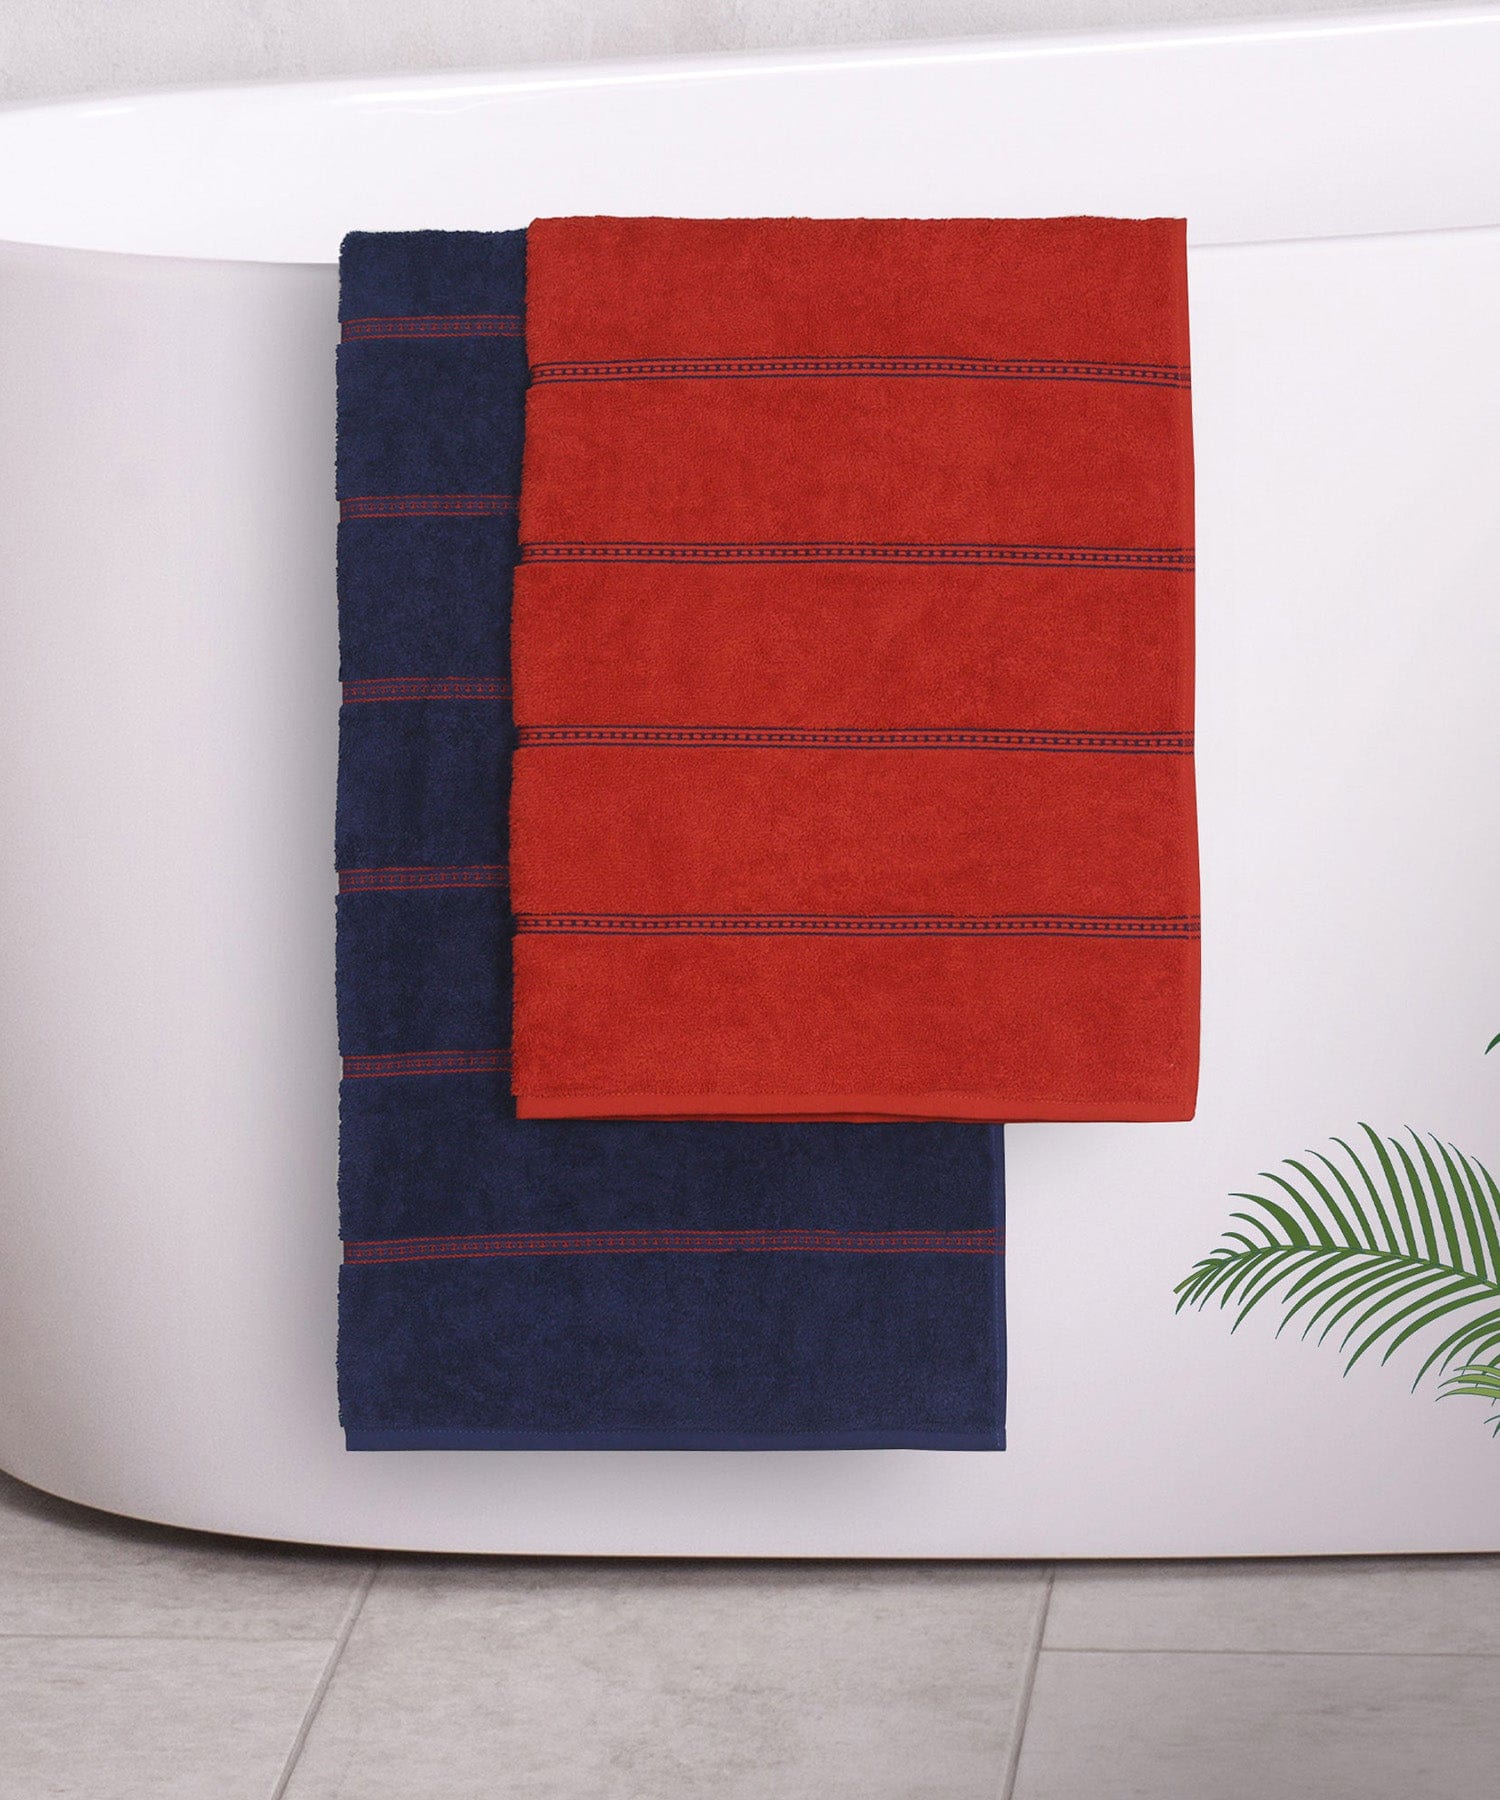 HIS & HER TOWEL,100% Cotton,Durable,500 GSM,Super Soft, Red & Navy